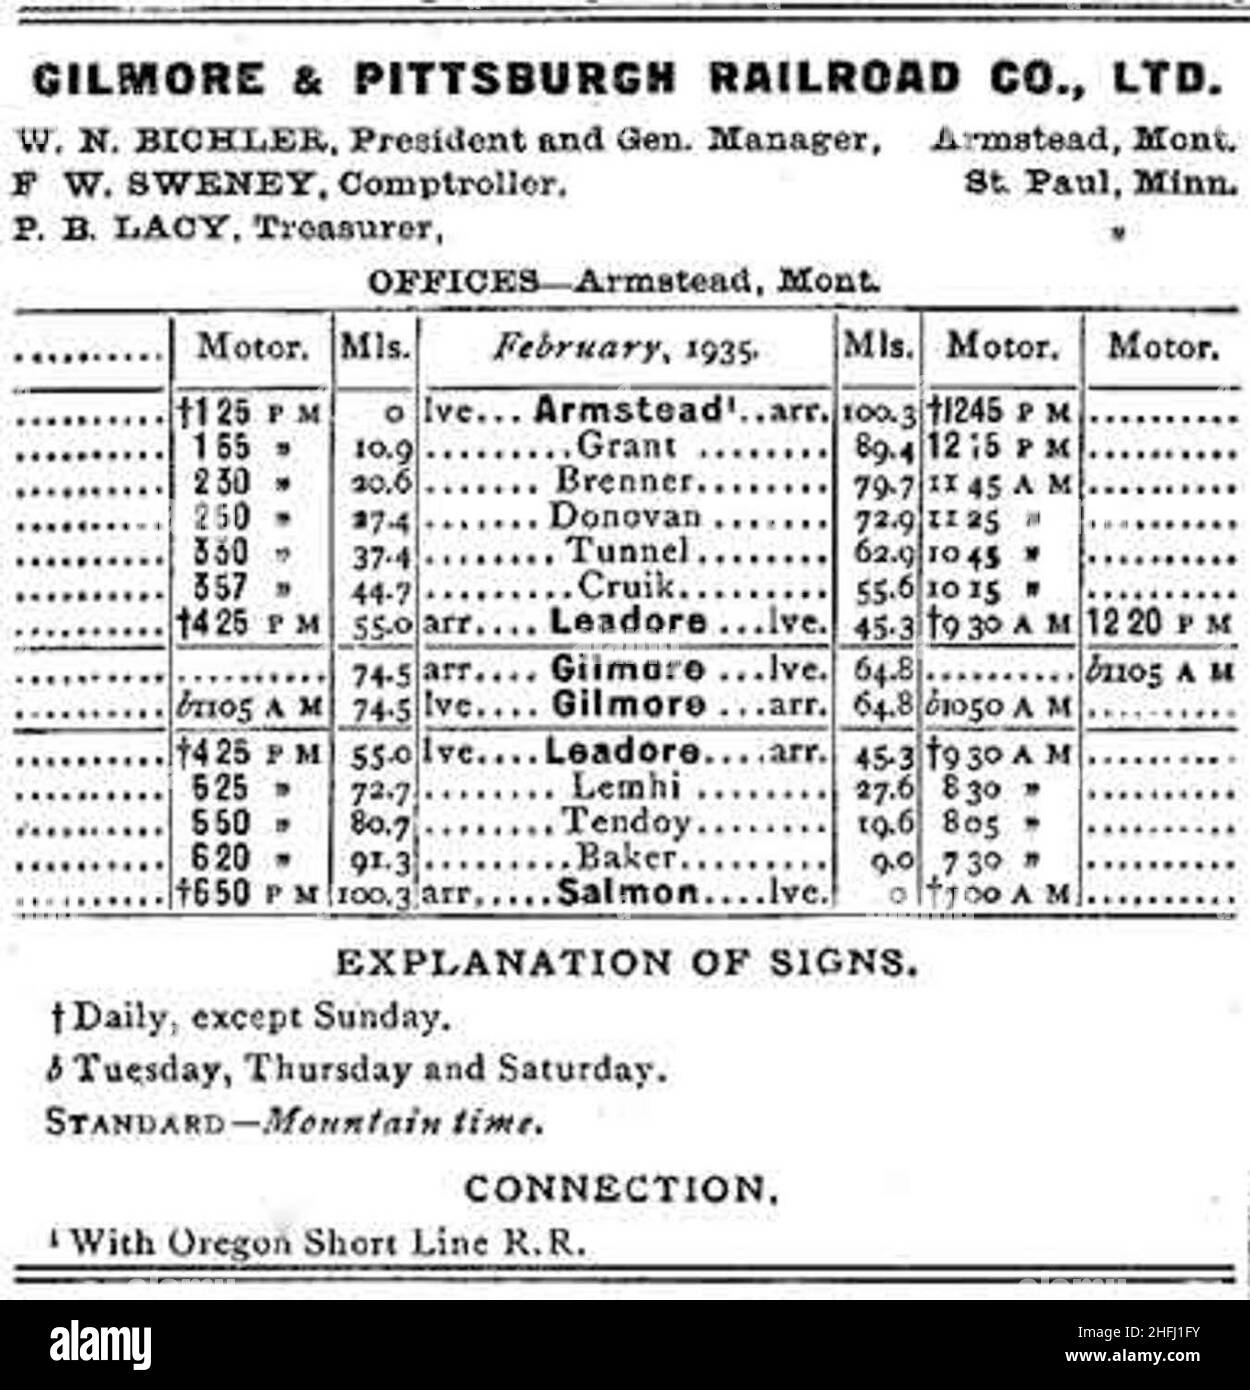 Public timetable of the Gilmore and Pittsburgh Railroad, first issued in 1910 and updated periodically thereafter. This image shows the railway schedules current as of February 1935. Stock Photo